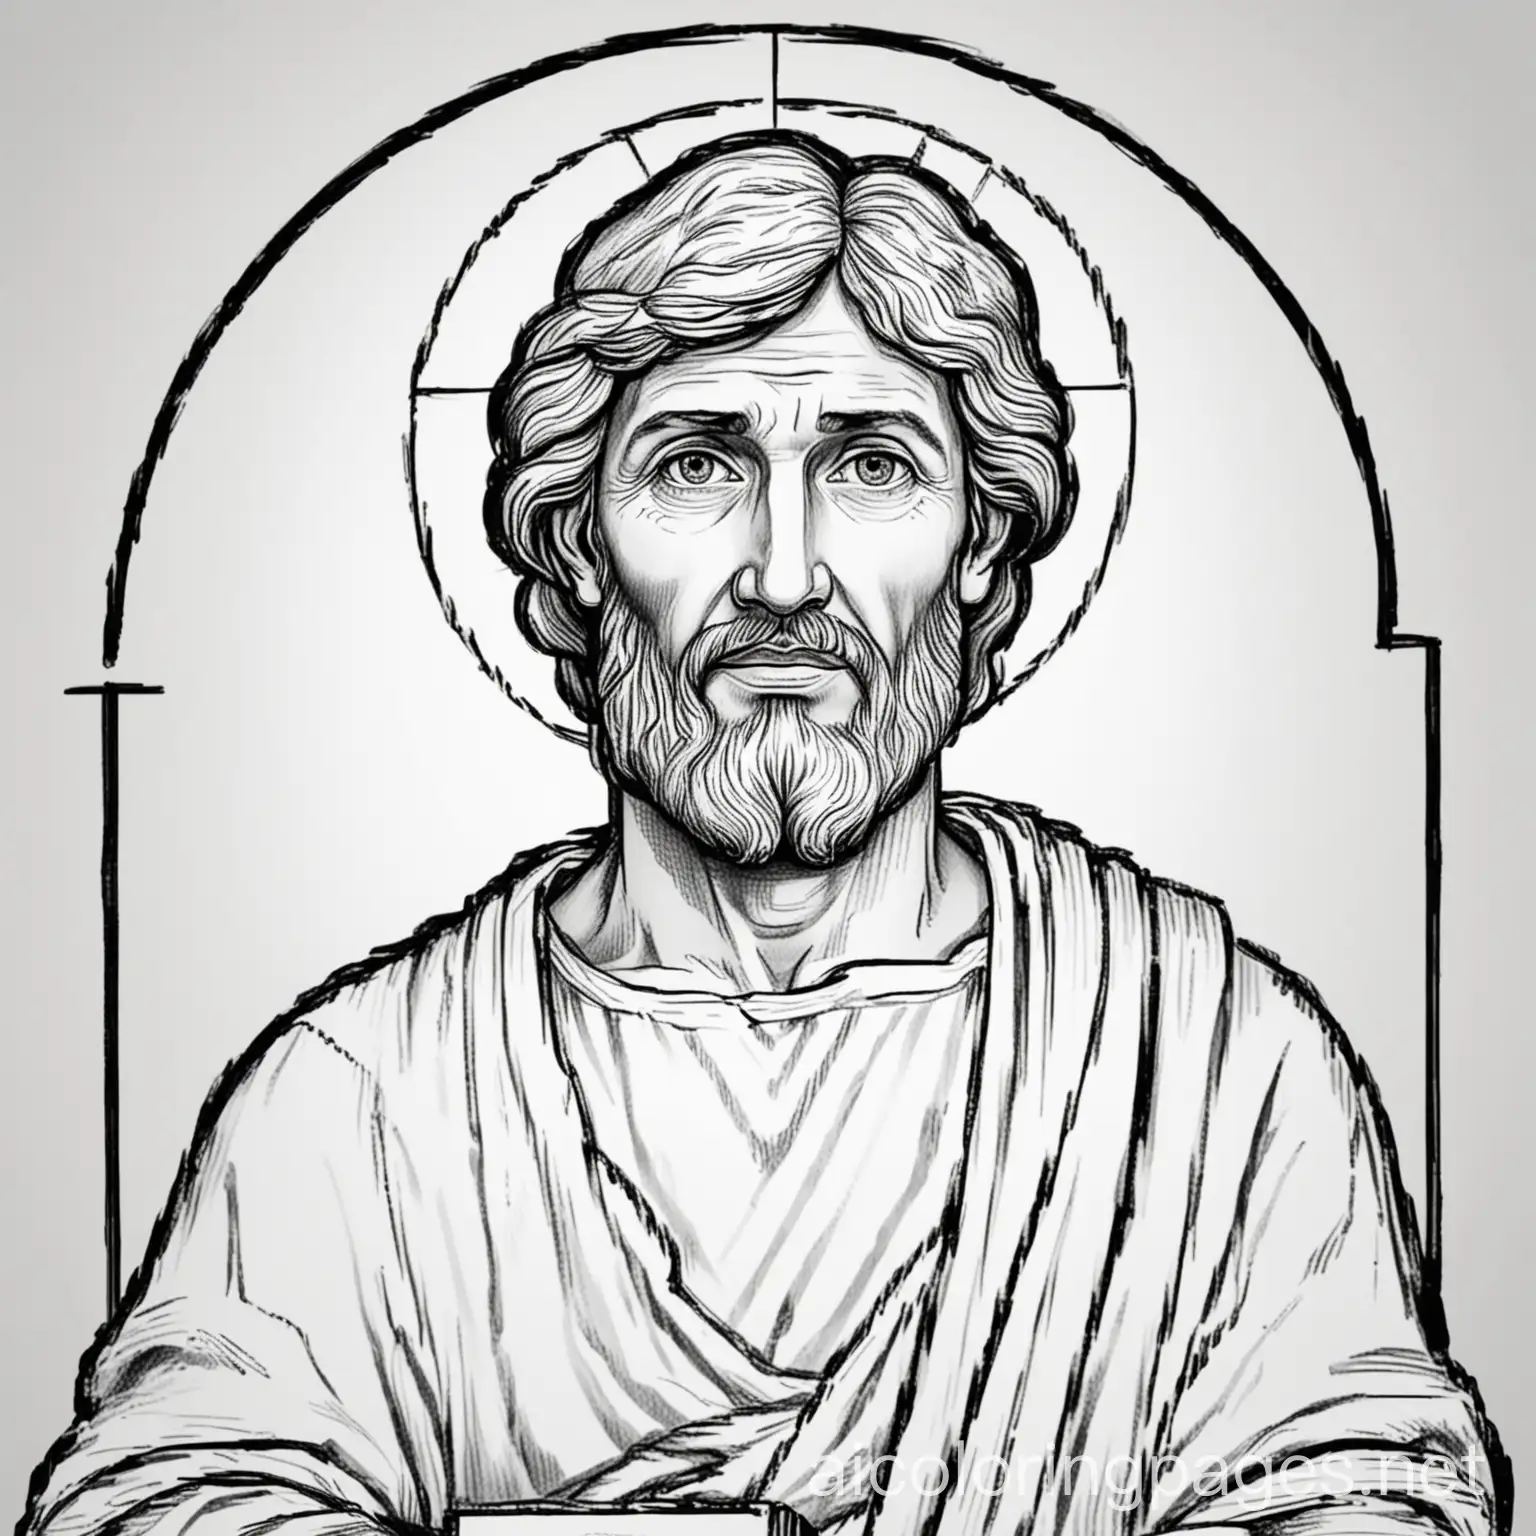 John-the-Apostle-Coloring-Page-Simple-Black-and-White-Illustration-for-Children